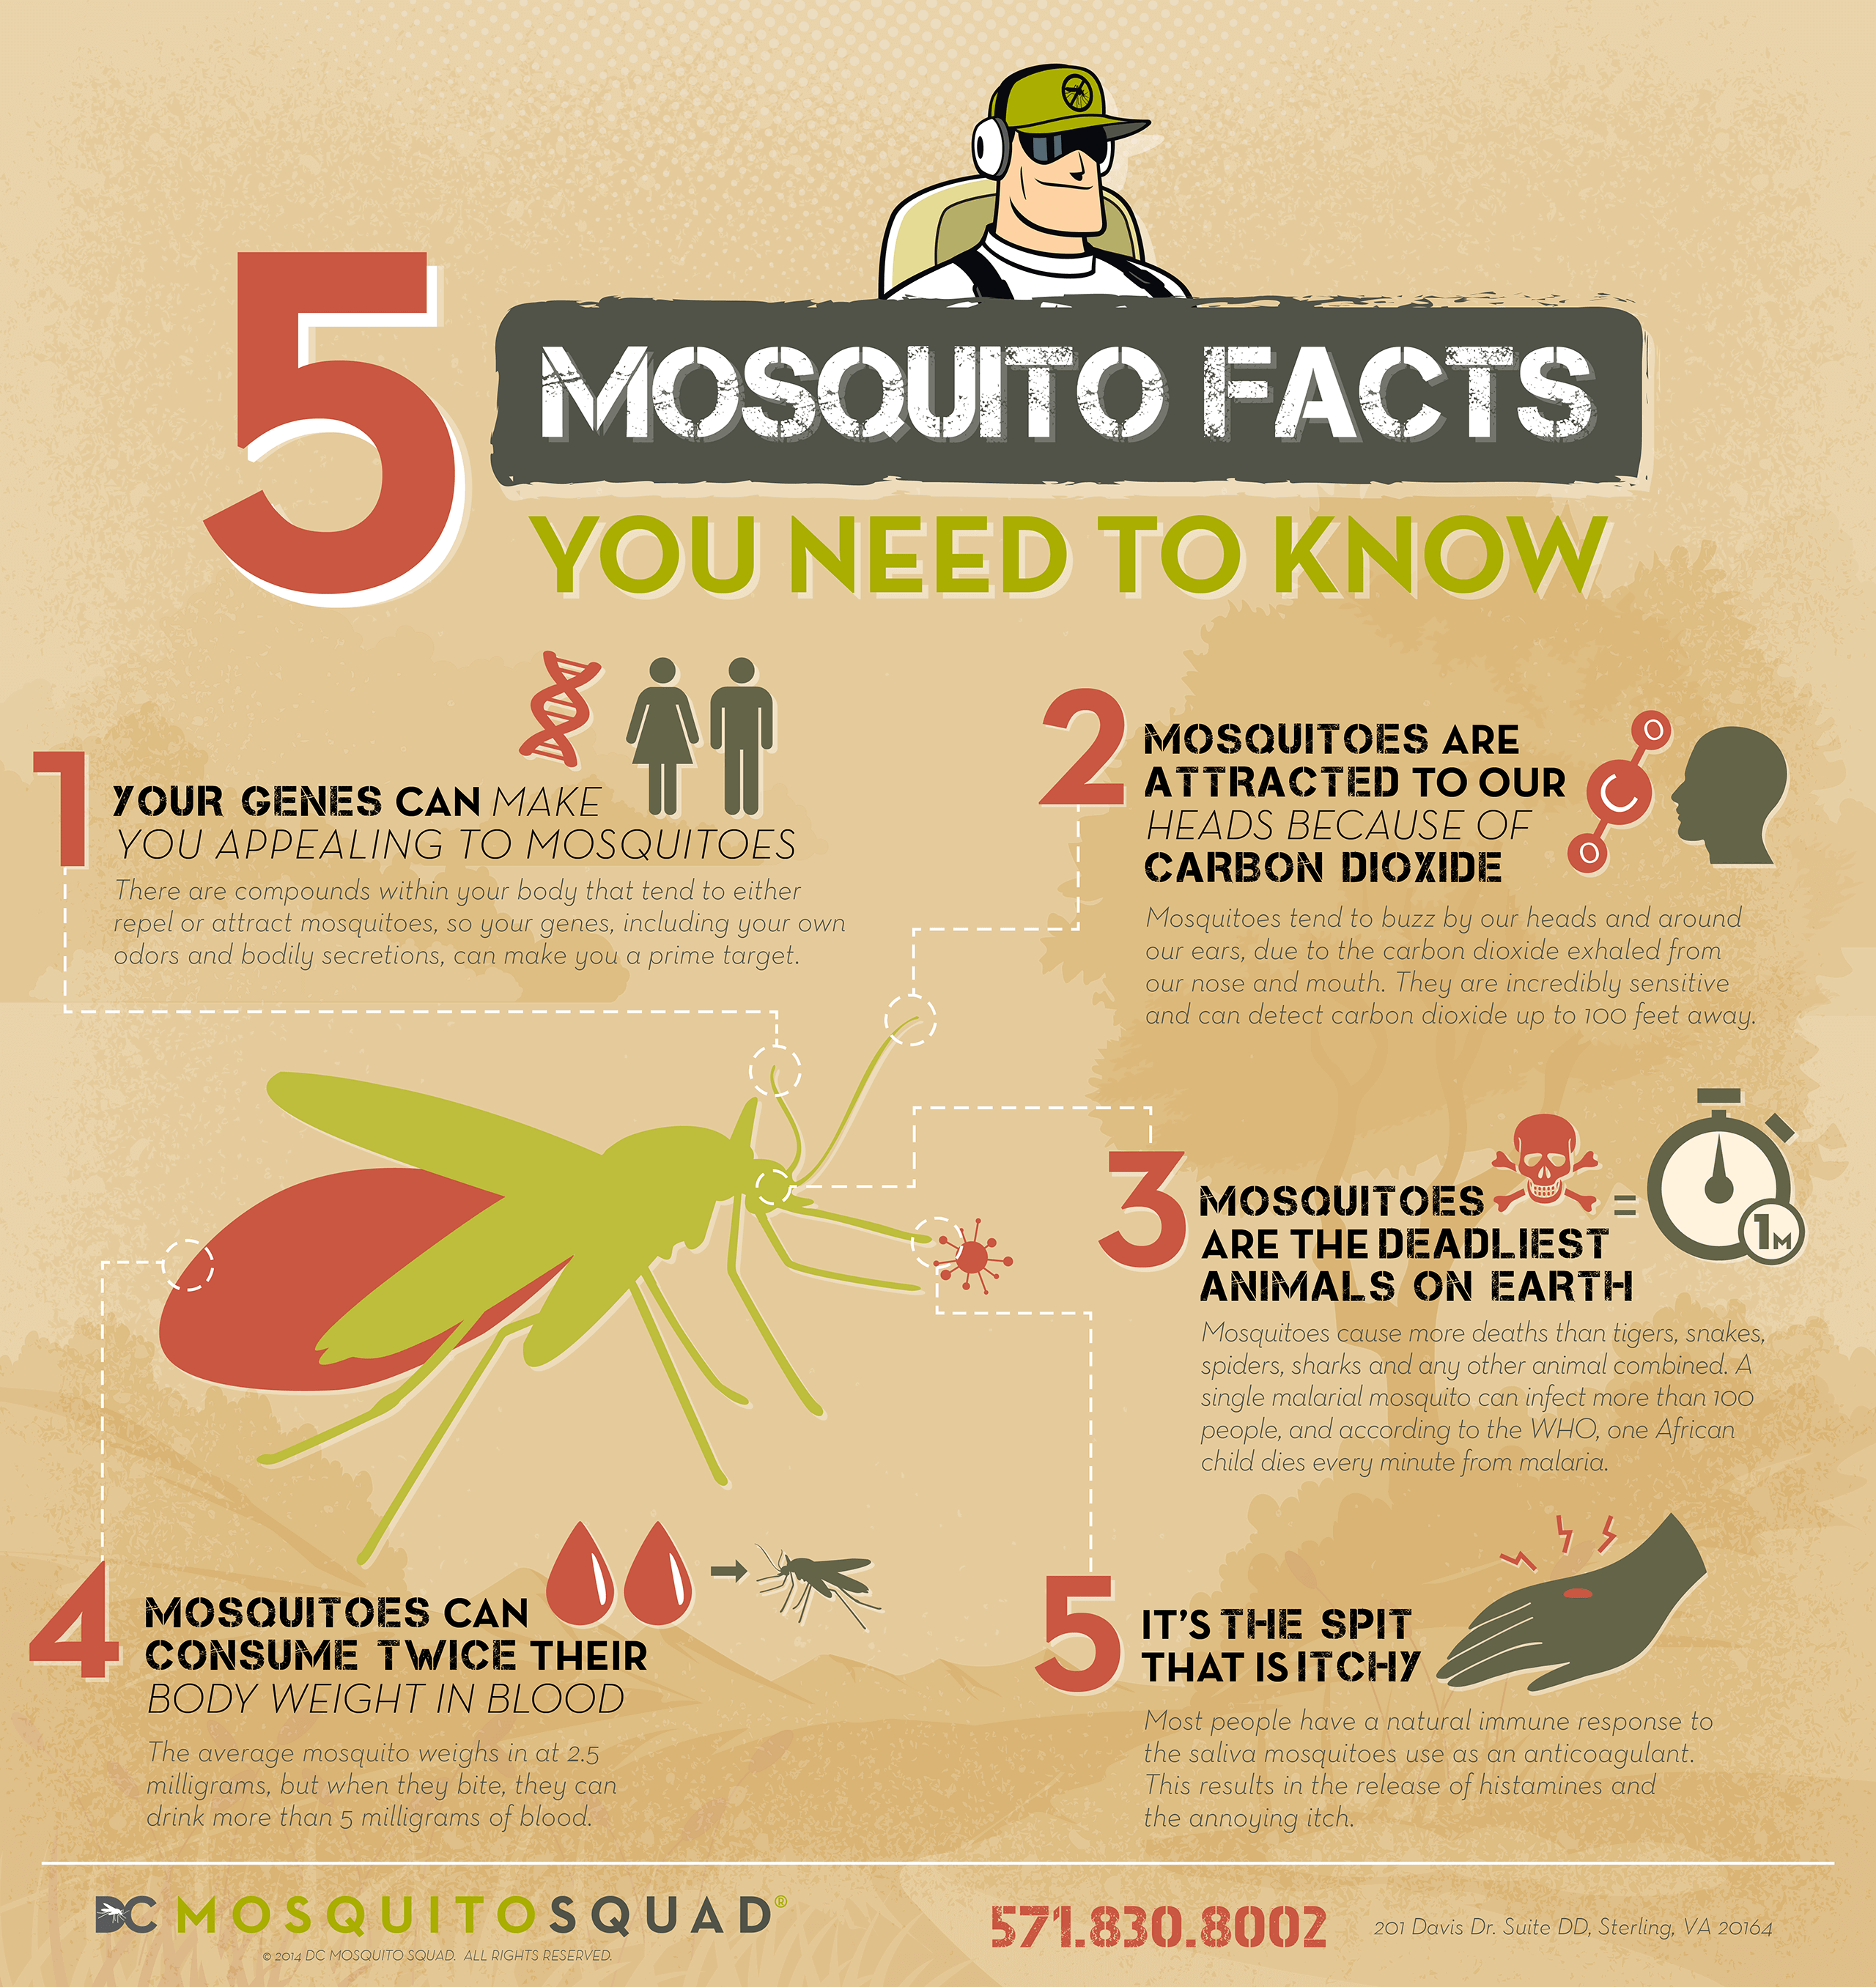 5 Mosquito Facts You Need to Know